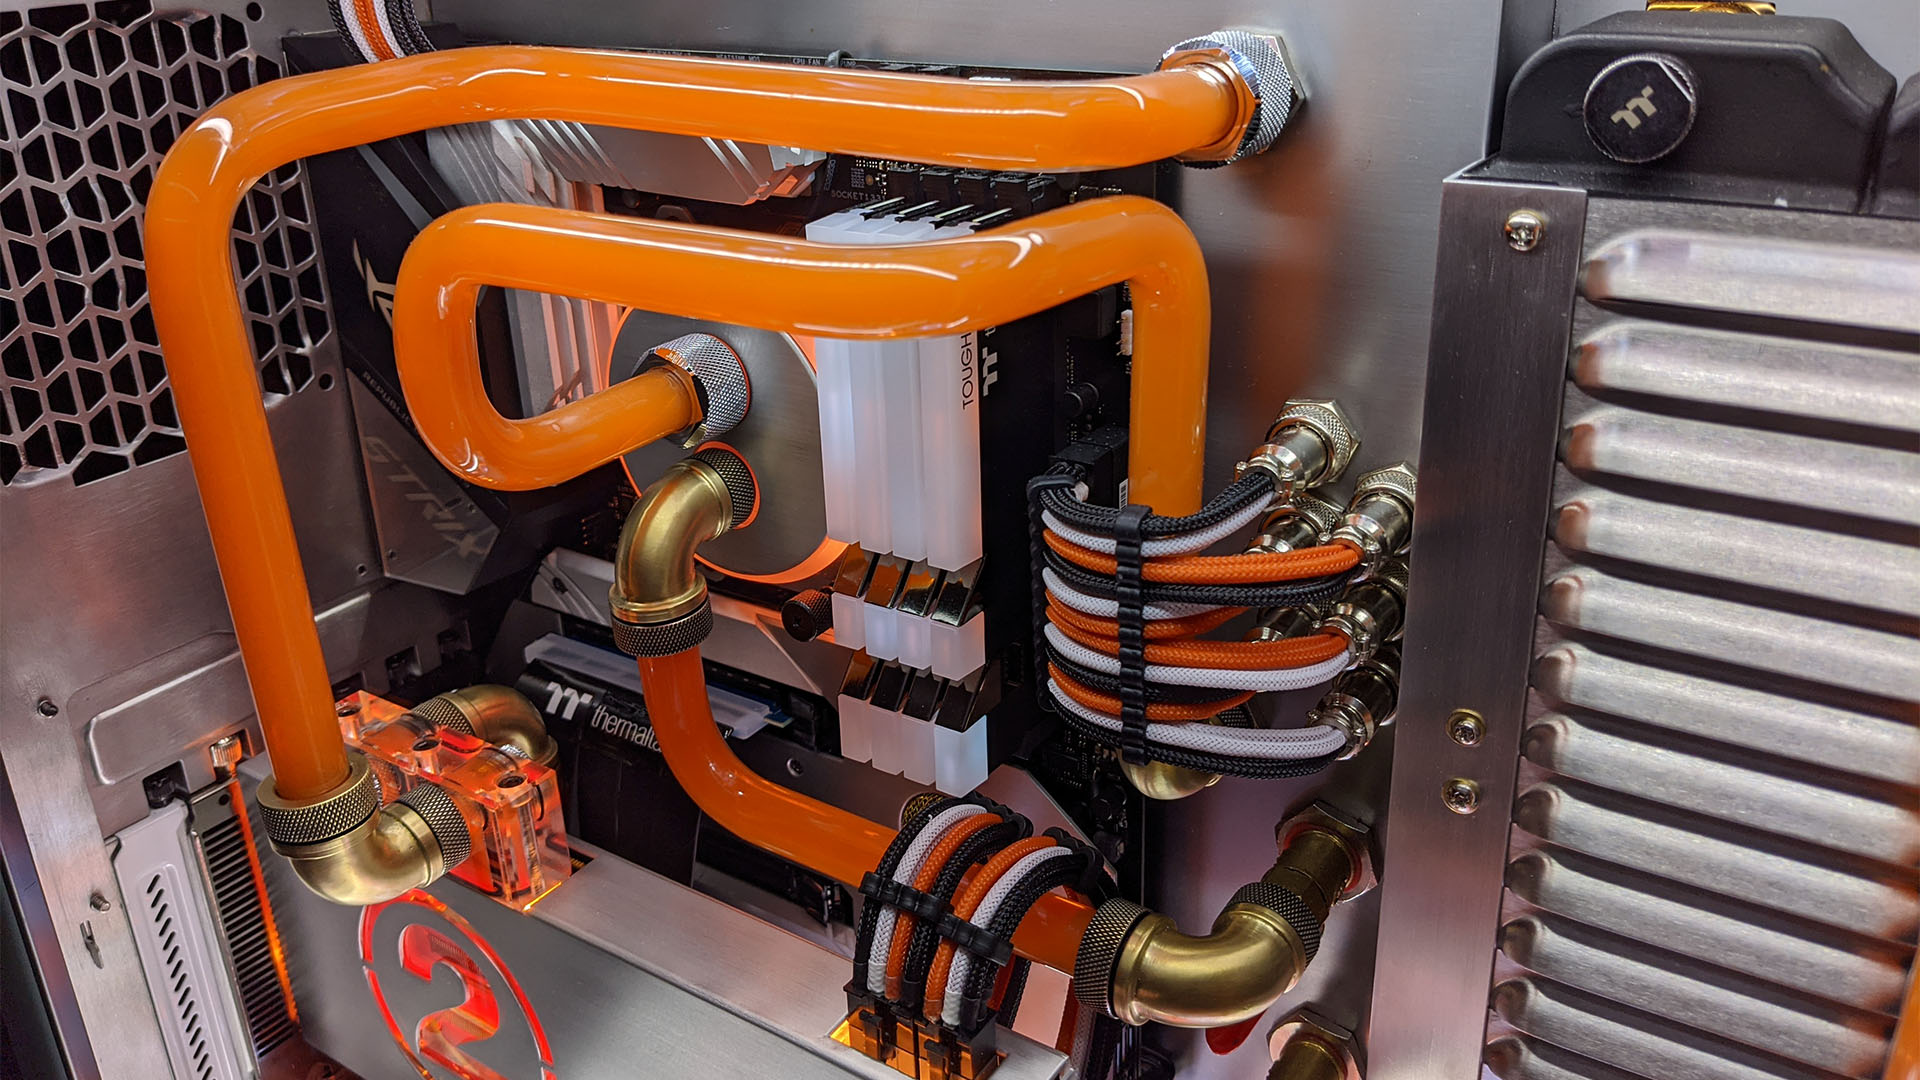 The gaming PC with brass fittings on orange water cooling pipes